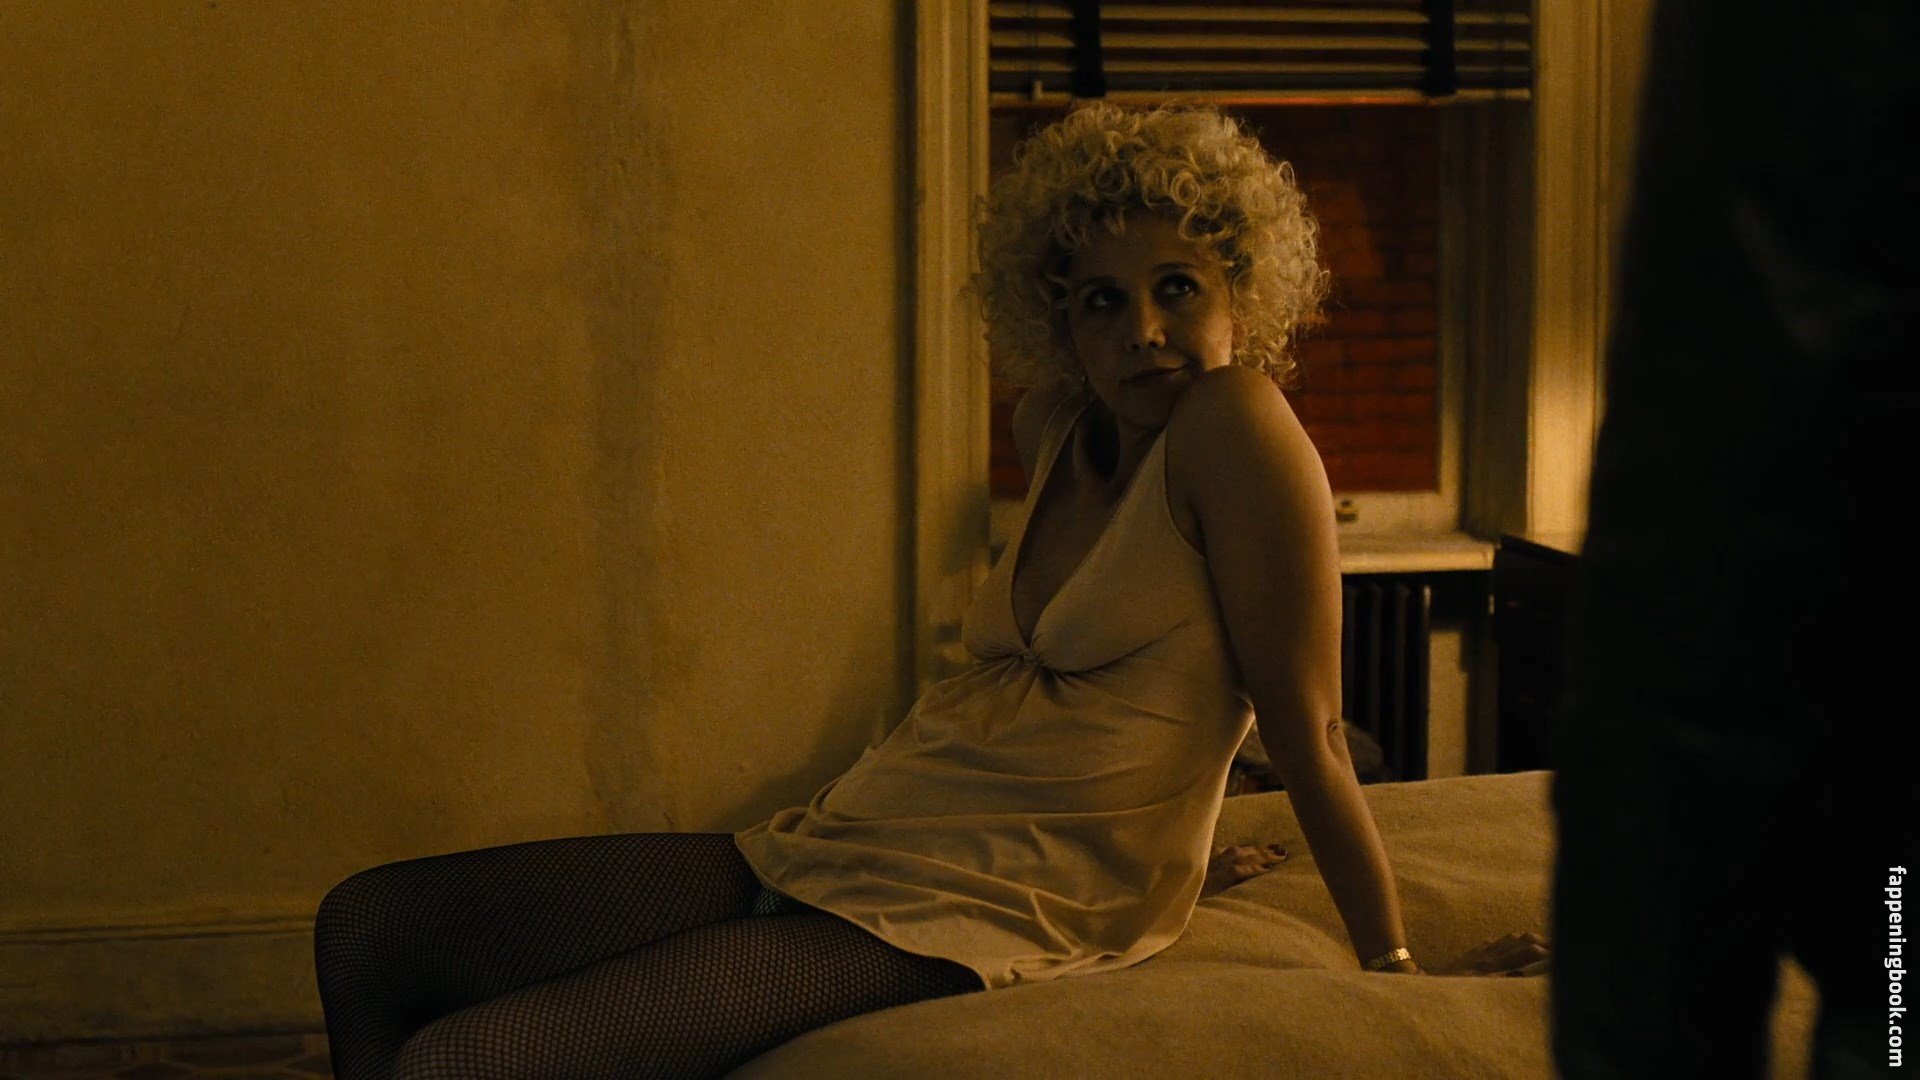 Maggie Gyllenhaal Nude, The Fappening - Photo #357309 - FappeningBook.